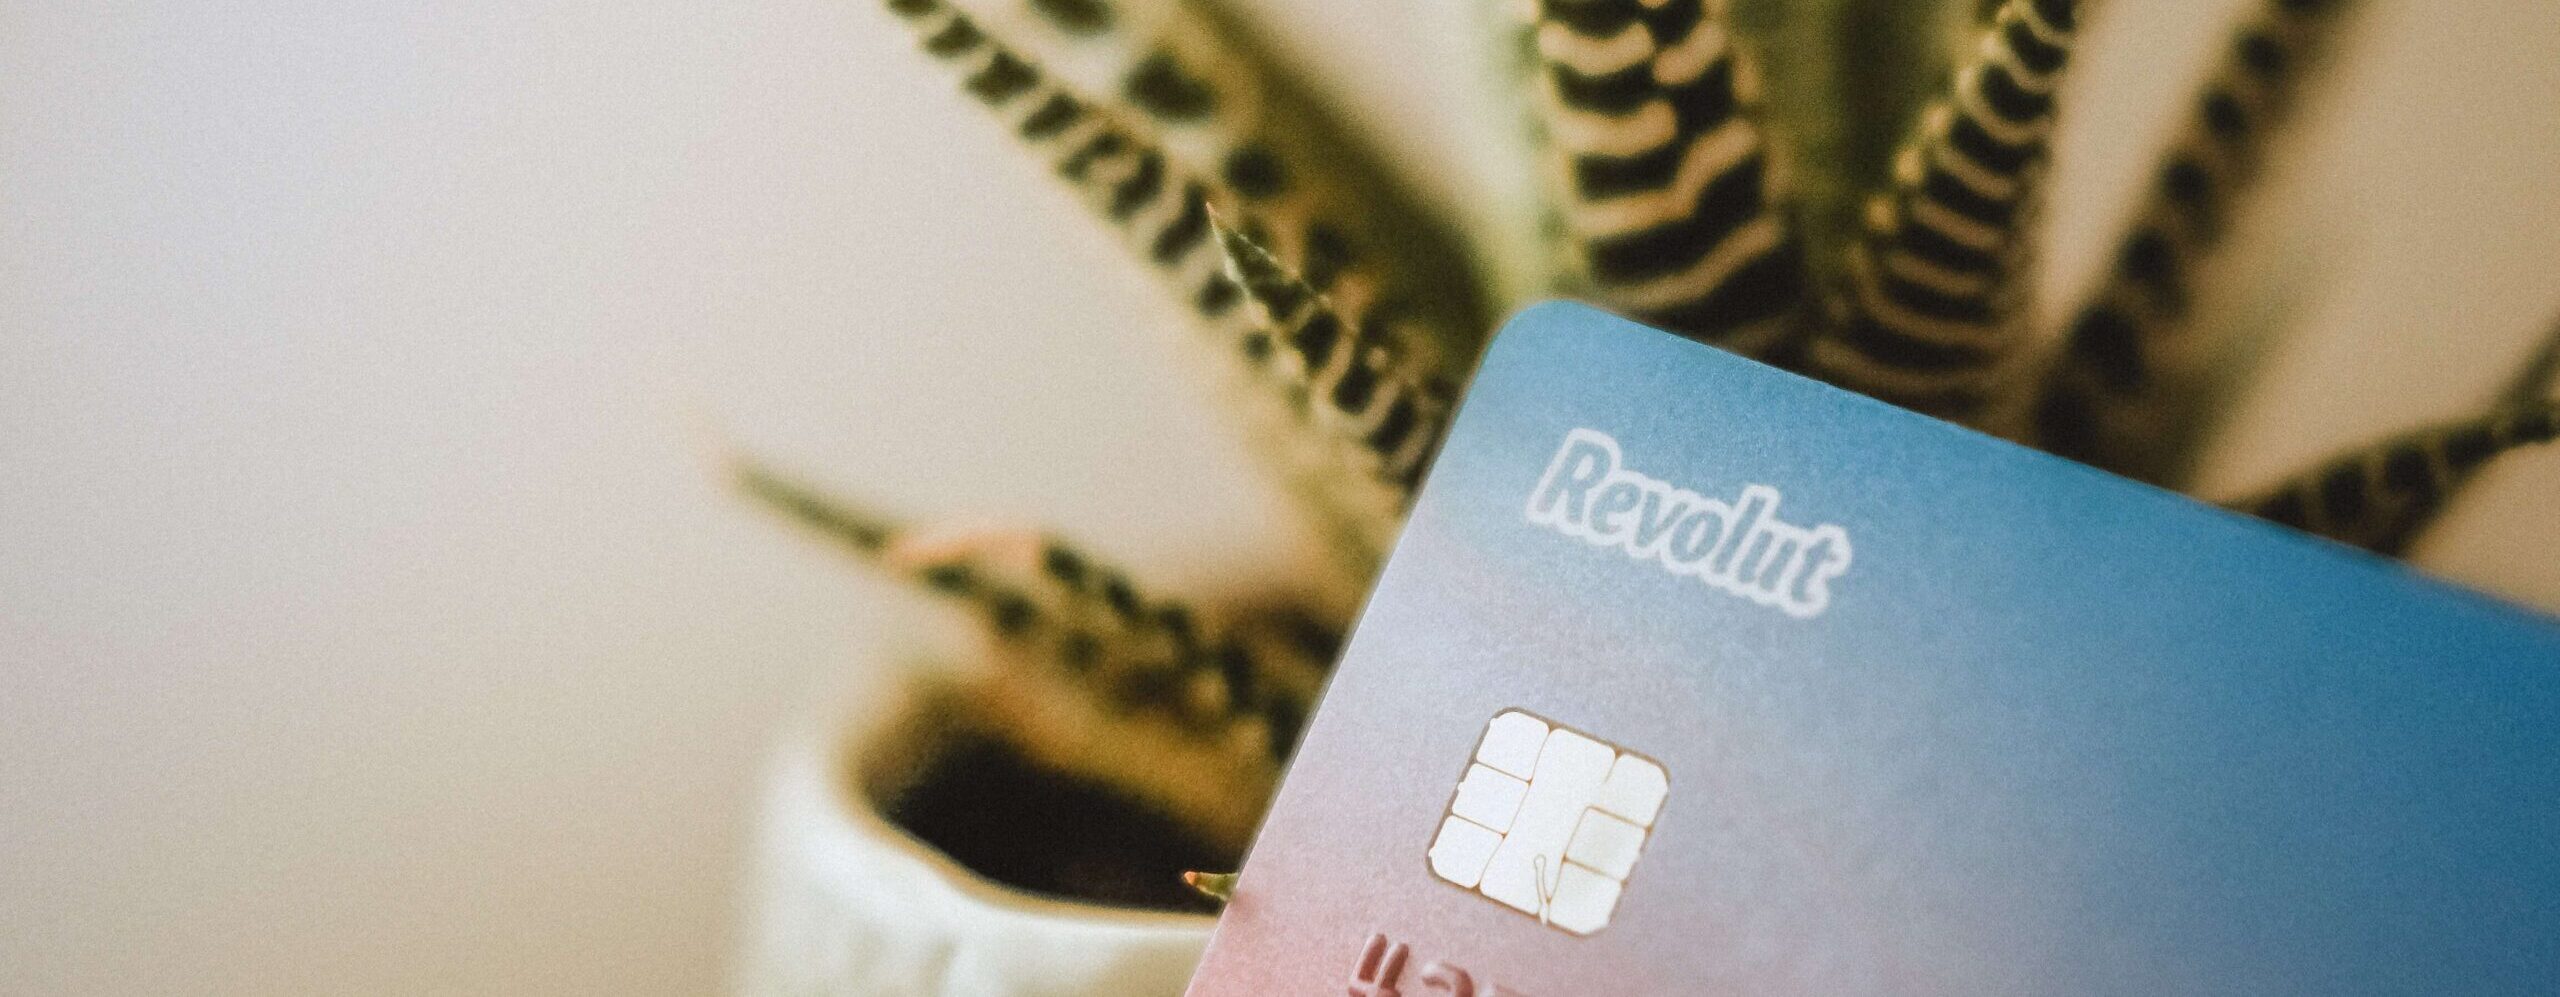 Revolut to Stop US Crypto Services Amid Regulatory Shifts